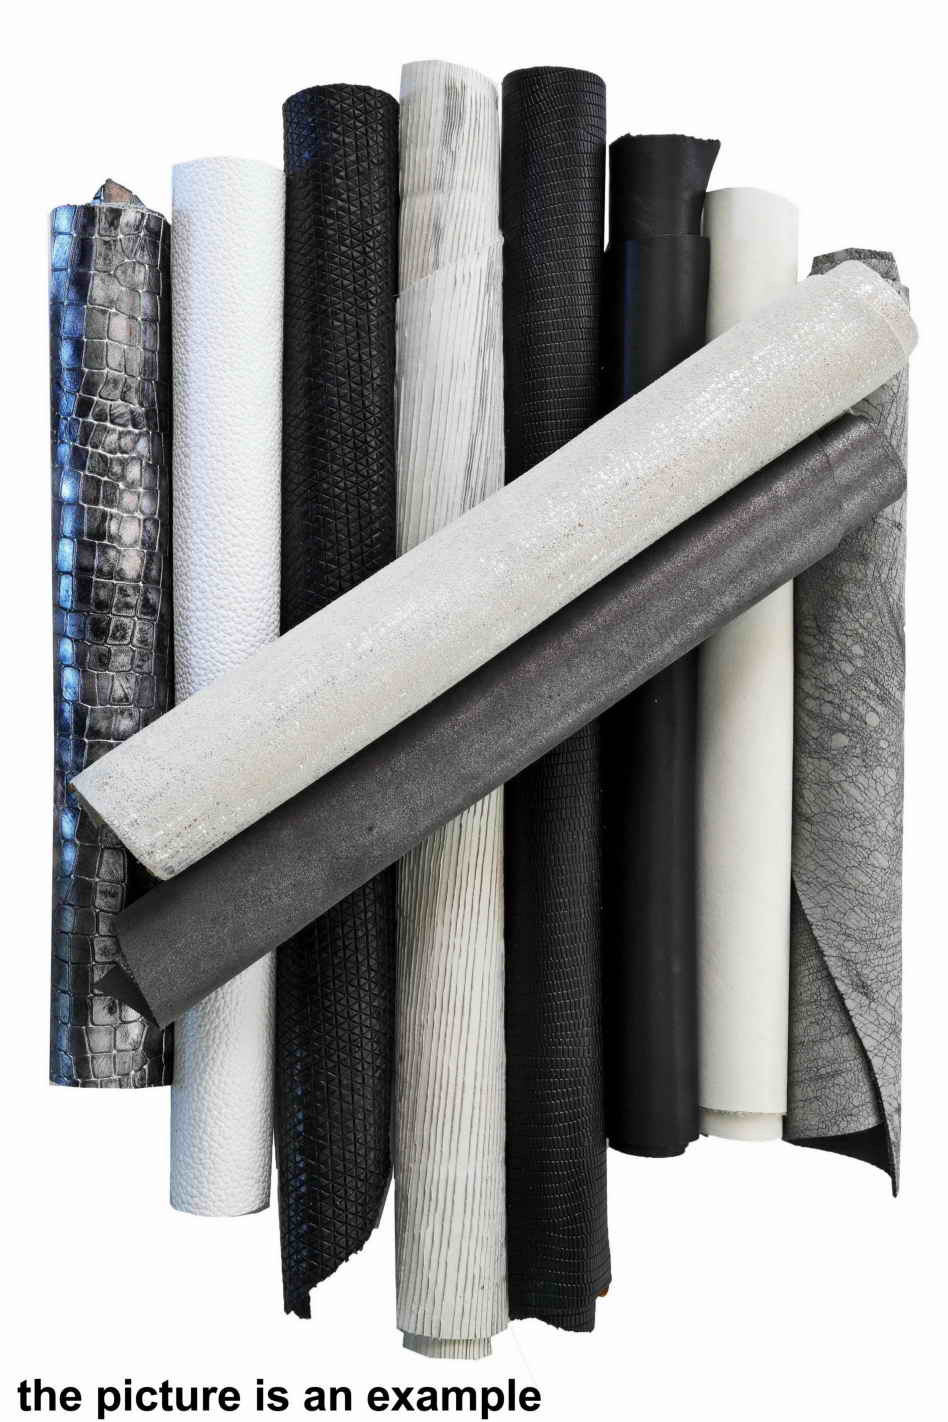 Mix leather scraps, WHITE, GREY and BLACK tones, fancy textures